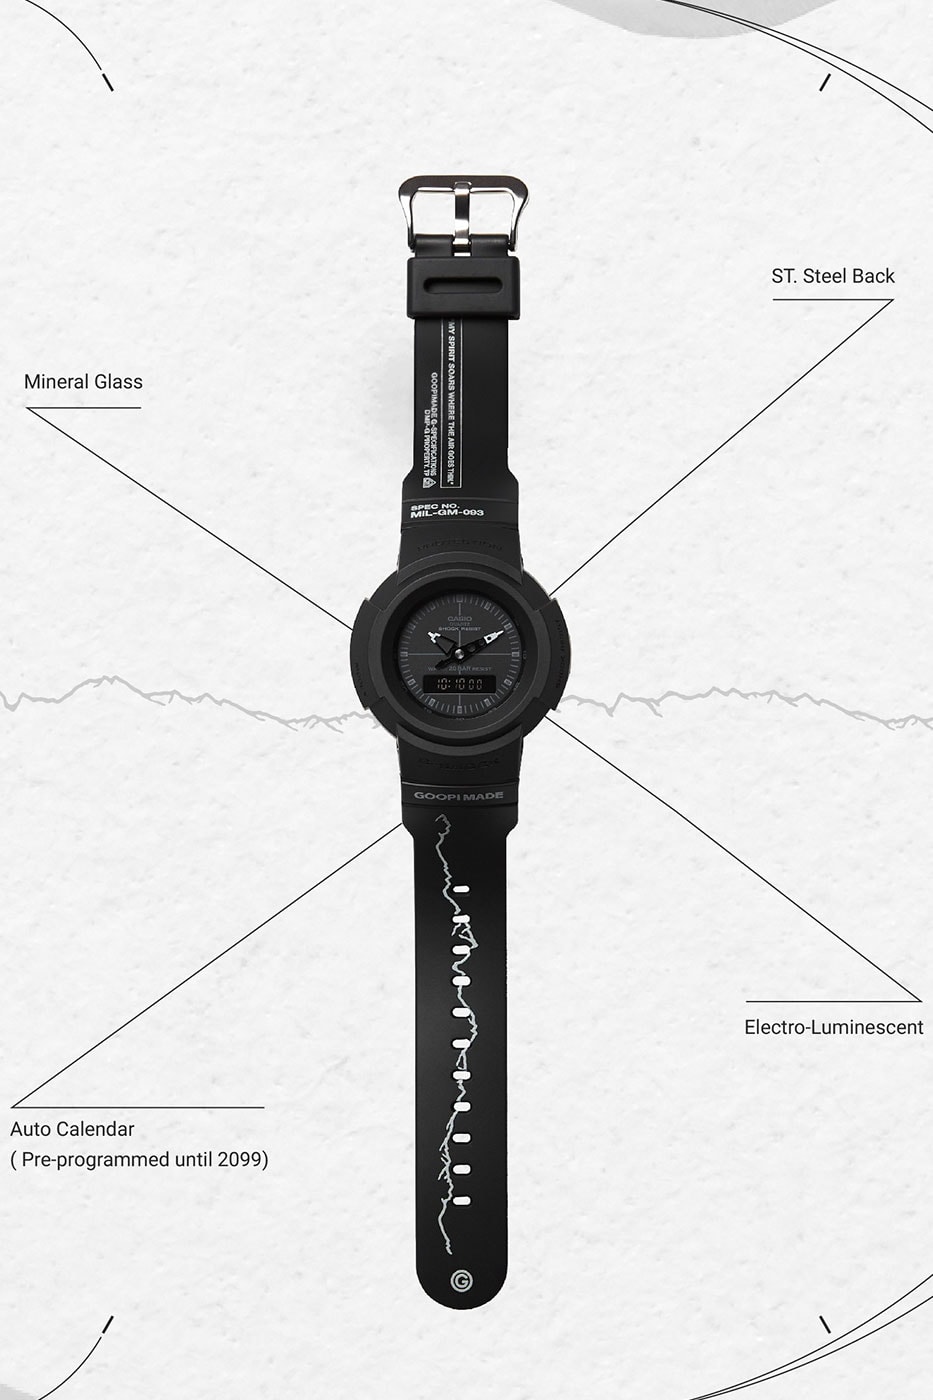 GOOPiMADE G-SHOCK Without APEX AW-500BBGO Watch Release Info Buy Price